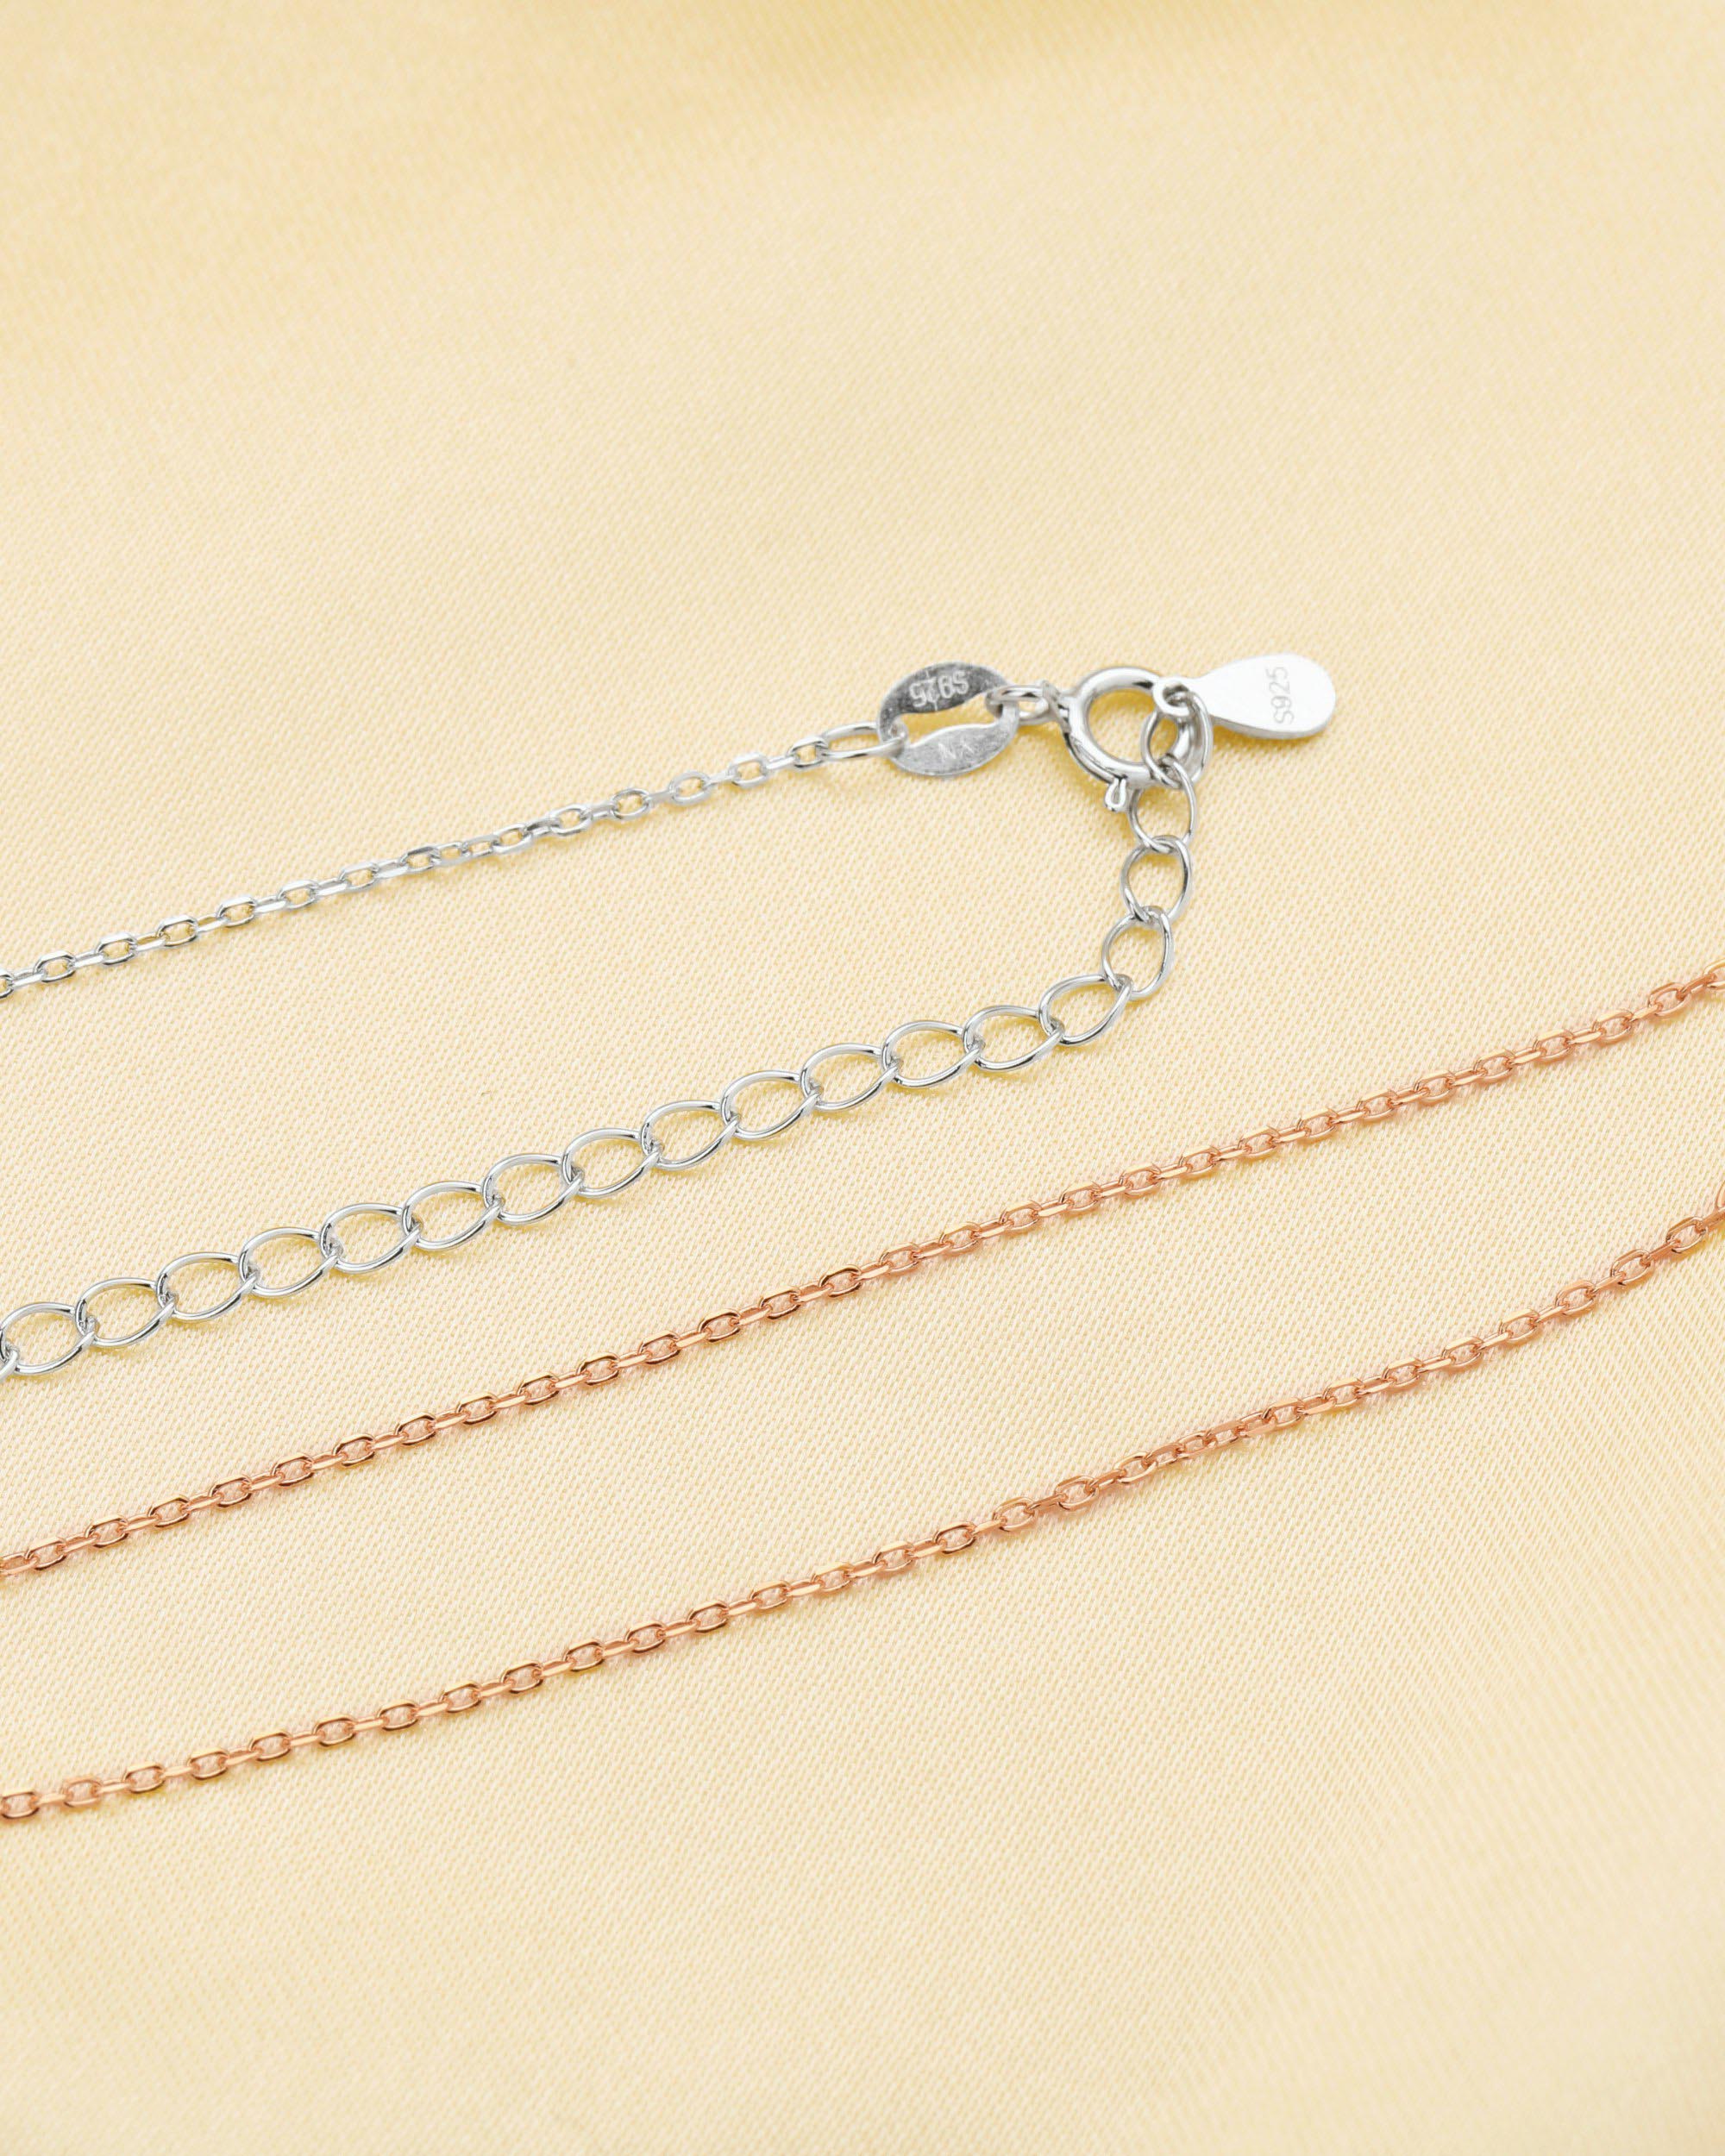 Simple Cable Oval Chain Necklace,Solid 925 Sterling Solid Silver Rose Gold Plated Necklace Chain,Oval Link O Chain 16Inches with 2 Inch Extension Chain 1320028 - Click Image to Close